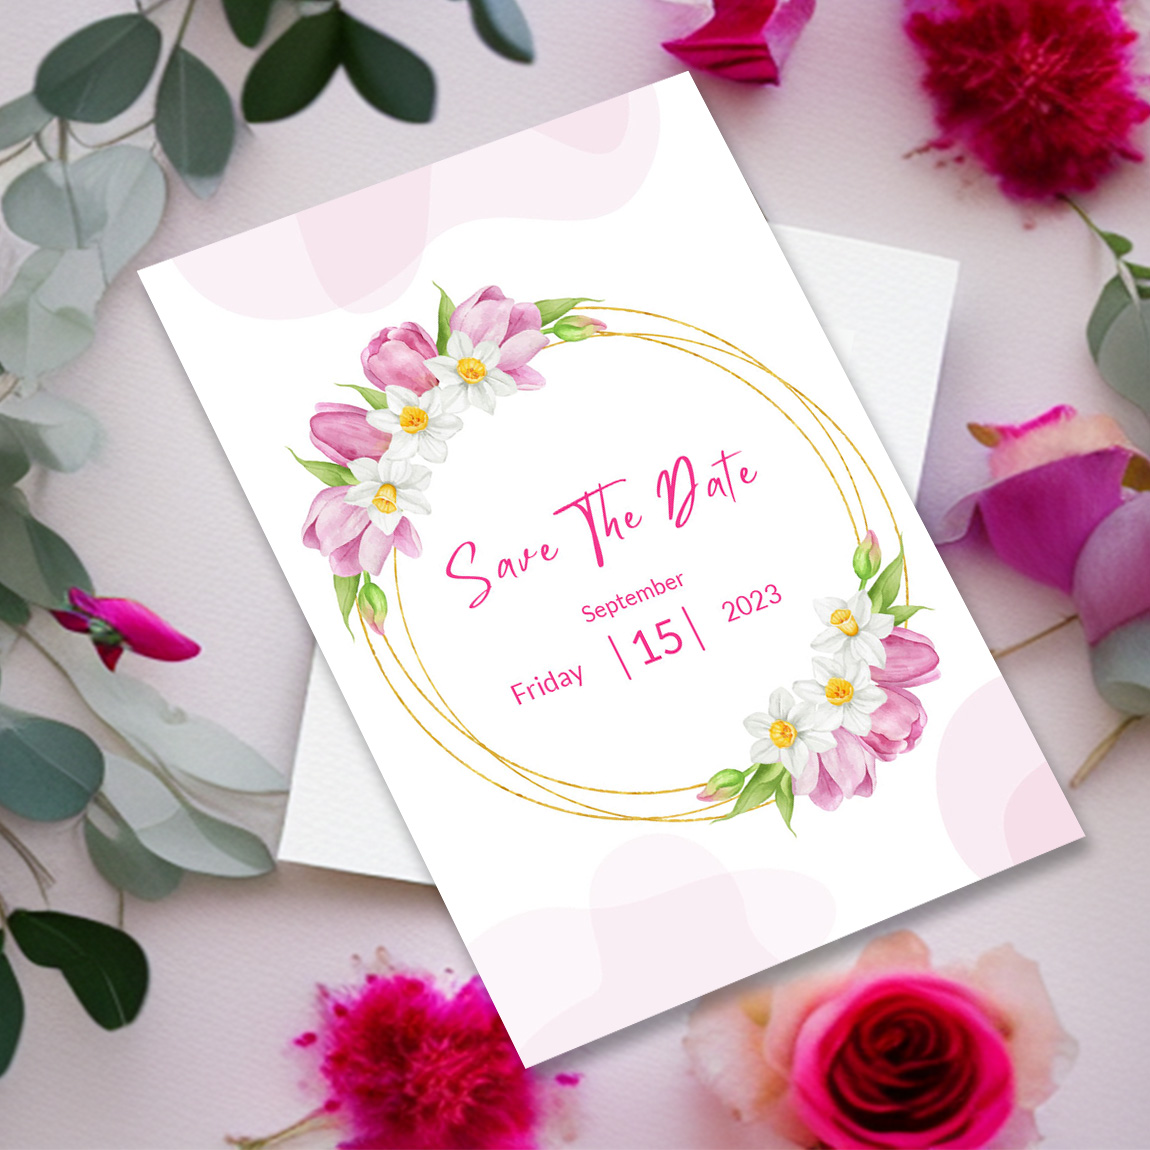 Image with charming wedding invitation with flowers.